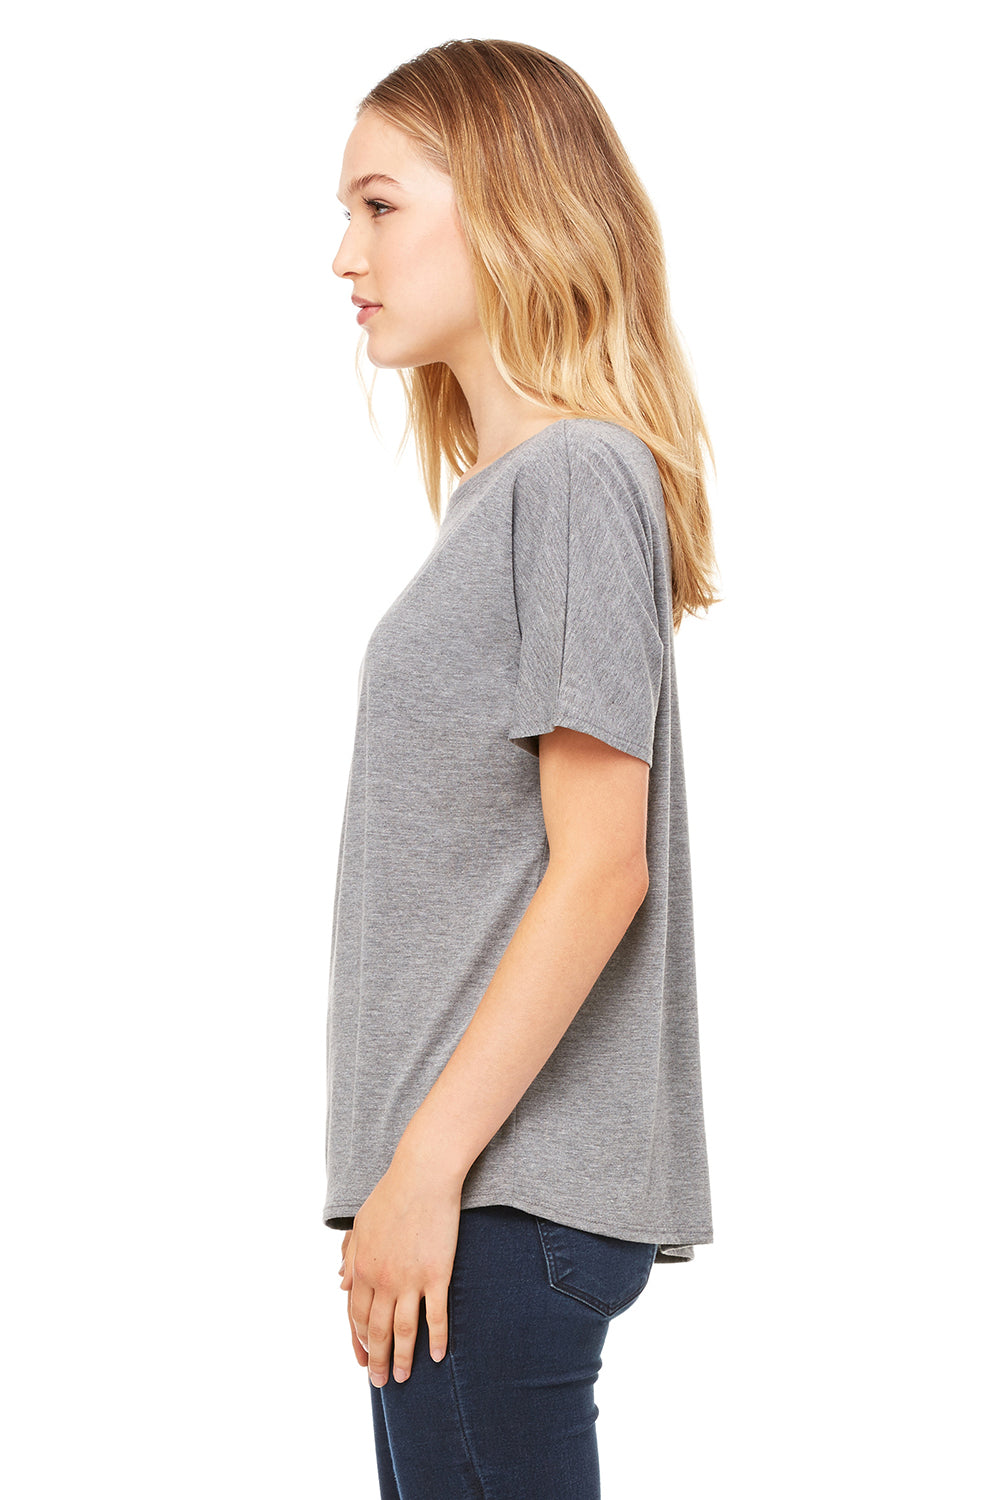 Bella + Canvas 8816 Womens Slouchy Short Sleeve Wide Neck T-Shirt Grey Triblend Side